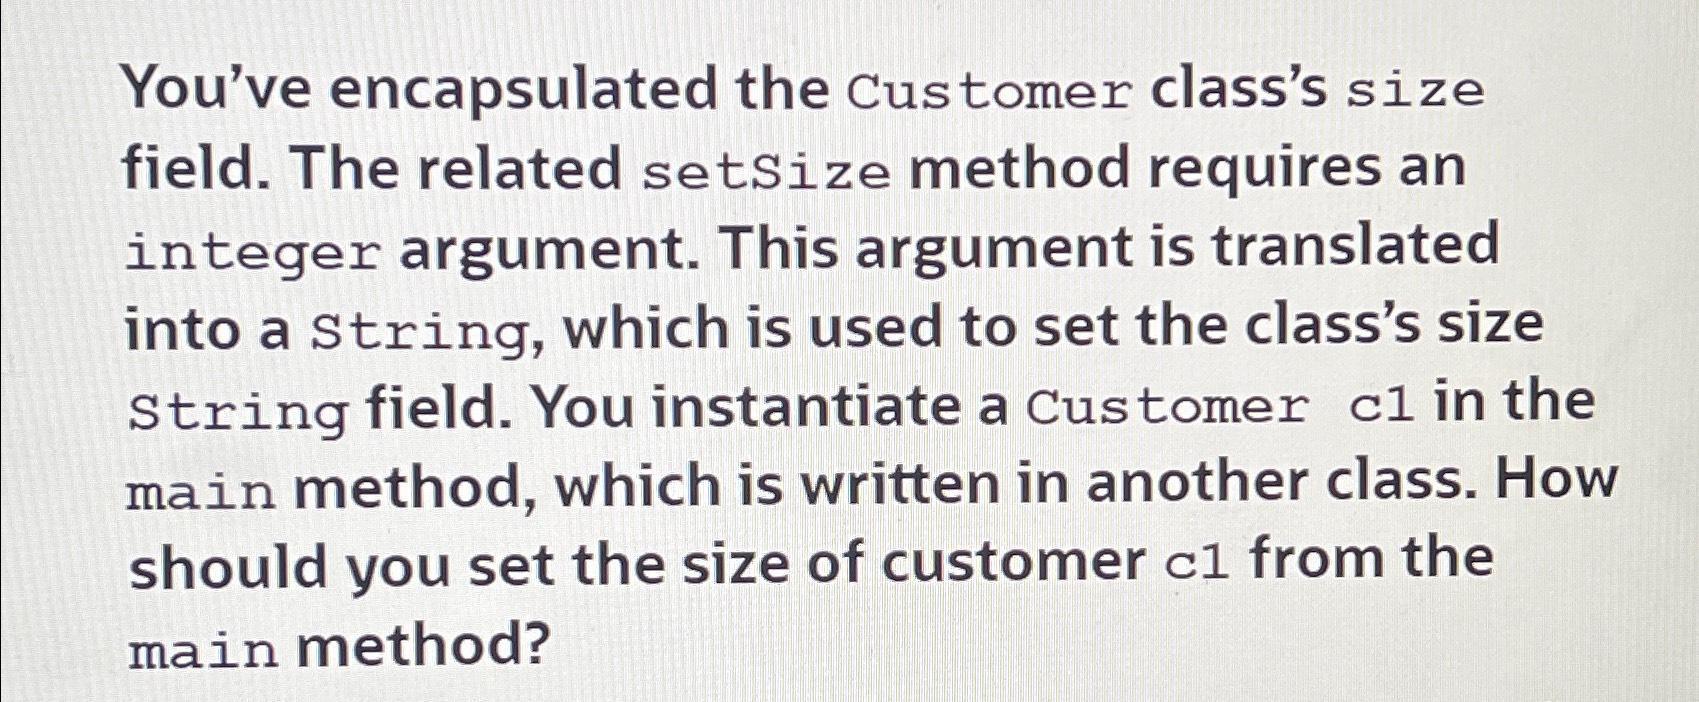 You've encapsulated the Customer class's size field. The related setSize method requires an integer argument.